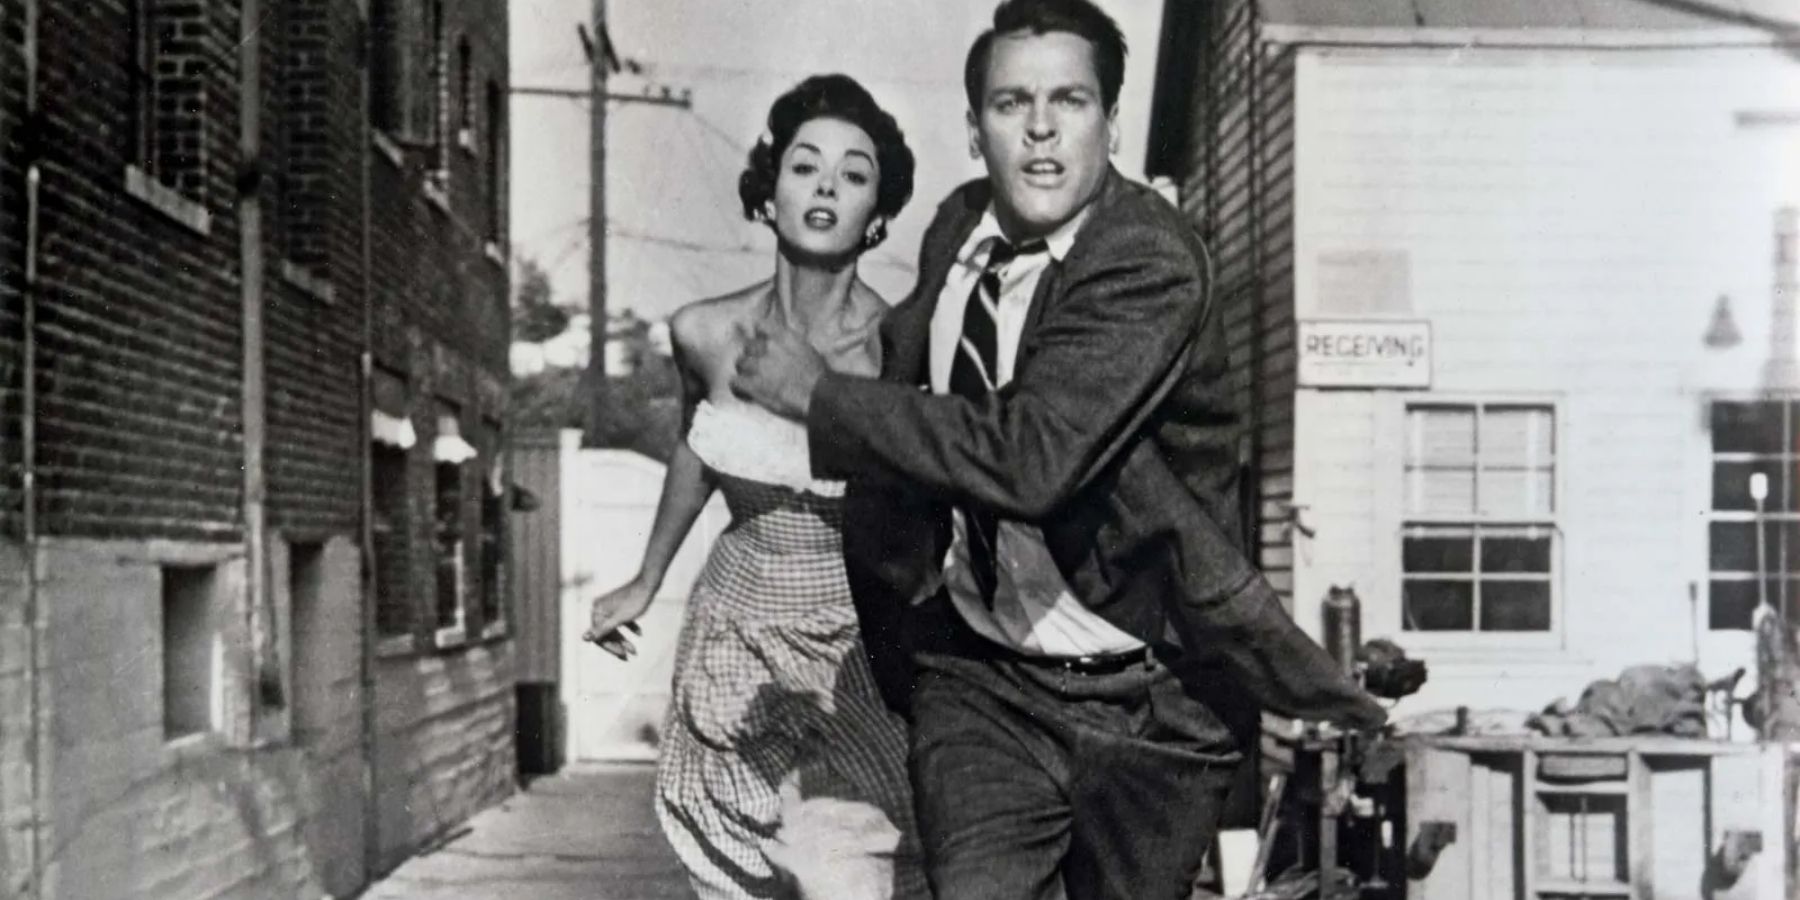 Dana Wynter and Kevin McCarthy In The Invasion Of The Body Snatchers (1956)